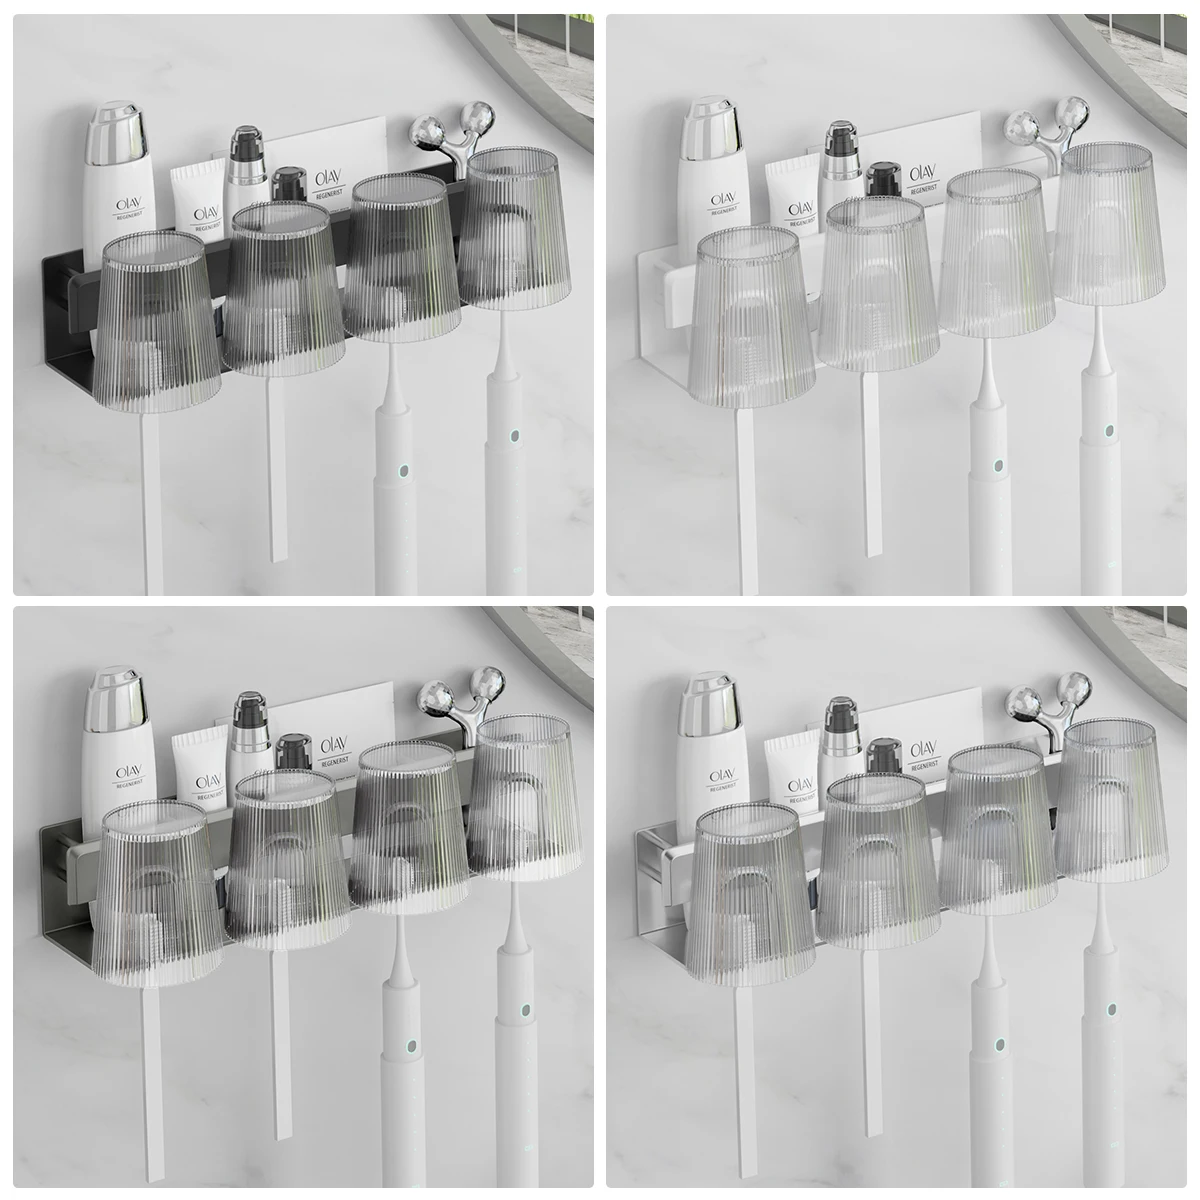 Hot Selling Simple Bathroom Toothbrush Holder Wall Mounted Family Aluminum Toothbrush Cup Holder